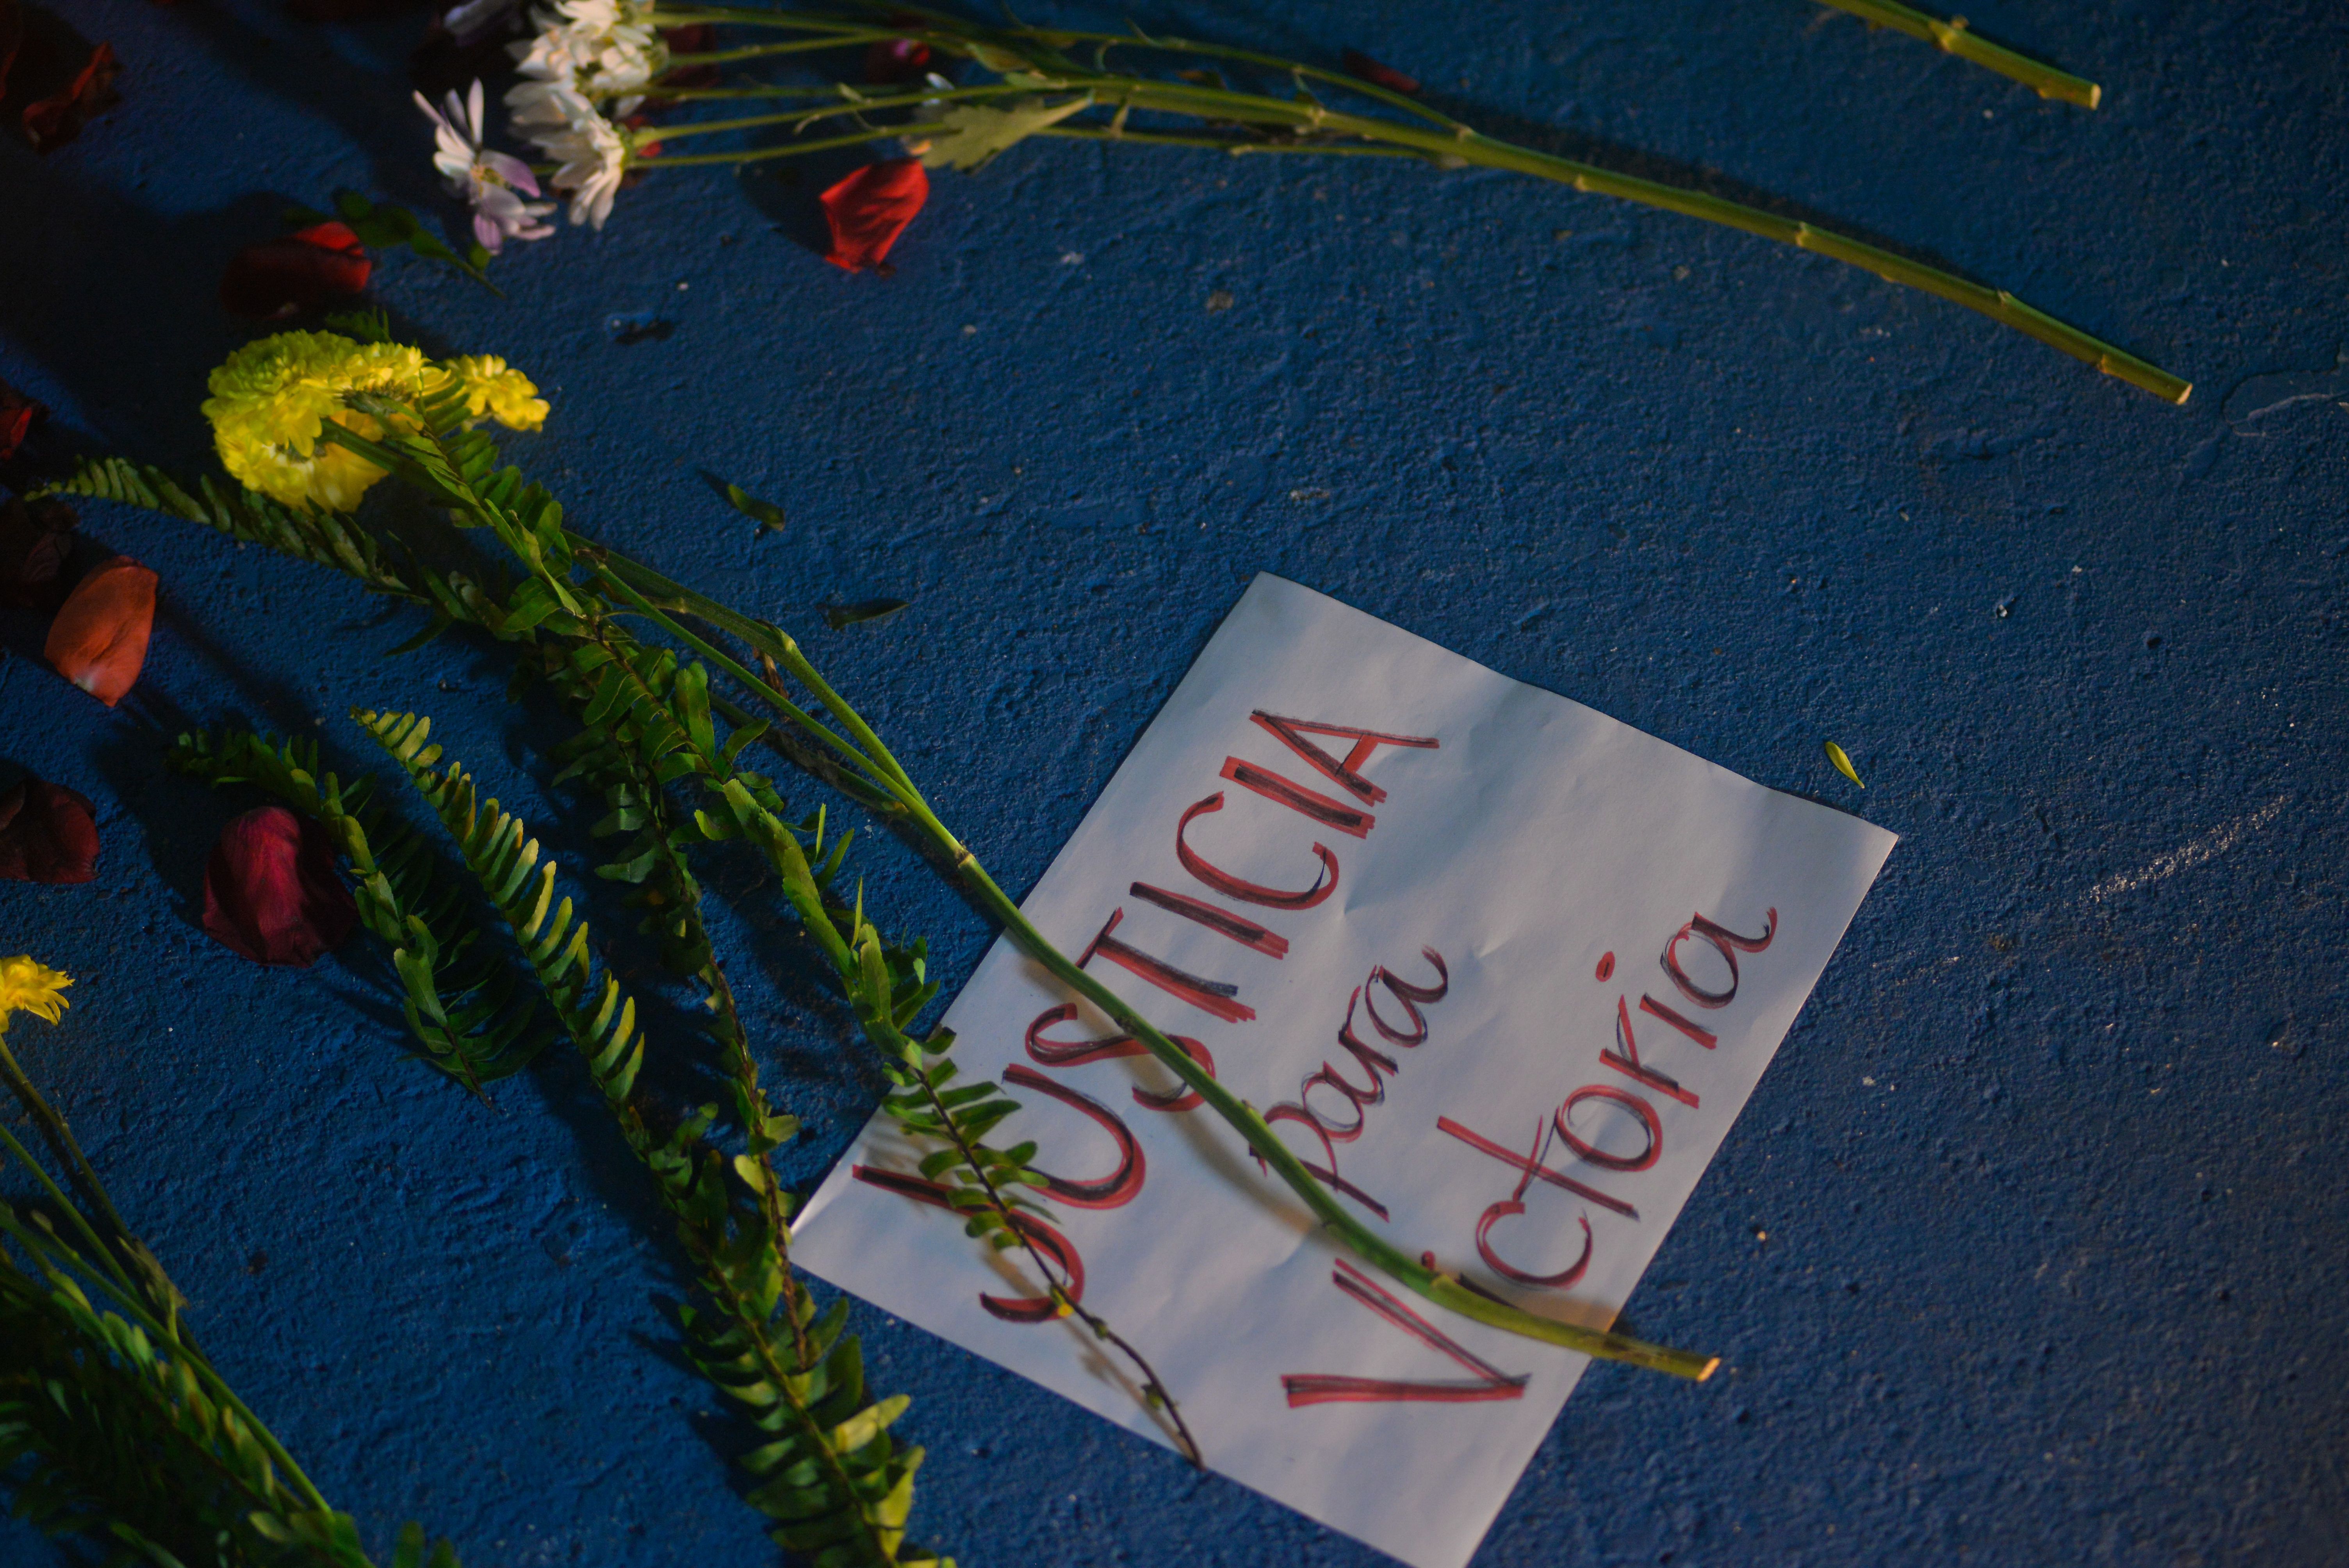 Photo of a sign on the ground that reads "Justicia para Victoria" with flowers laid around it